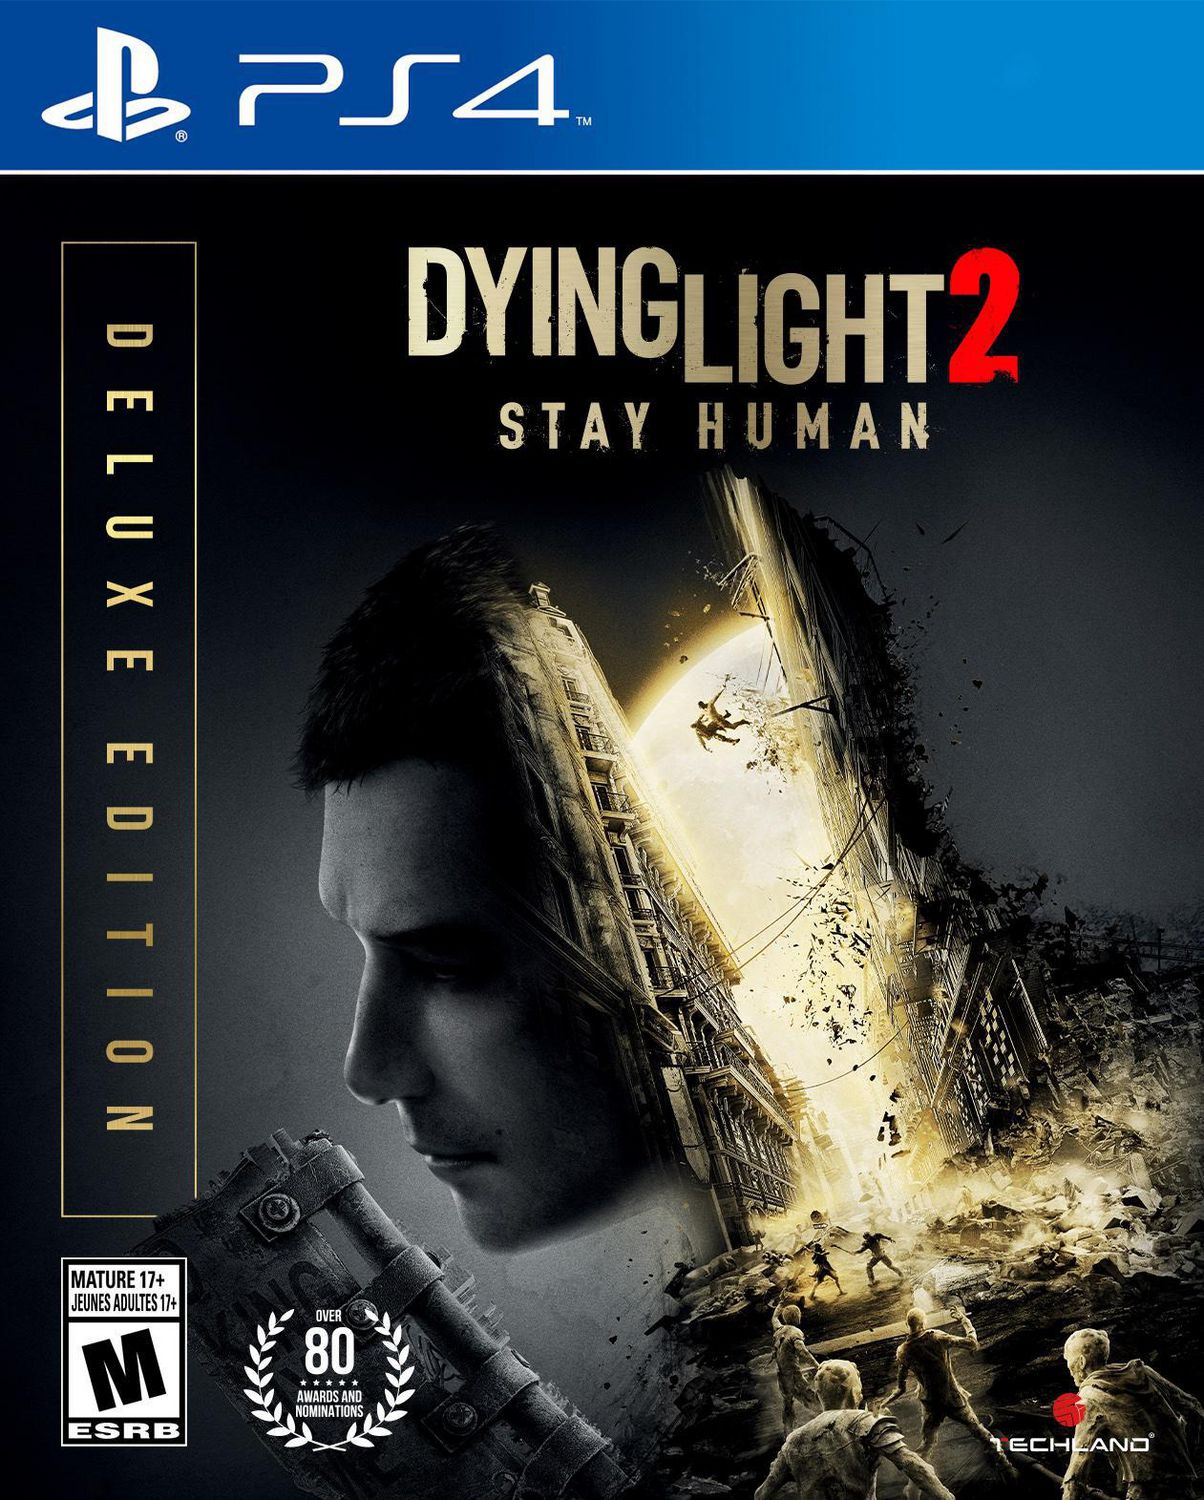 download free dying light ps4